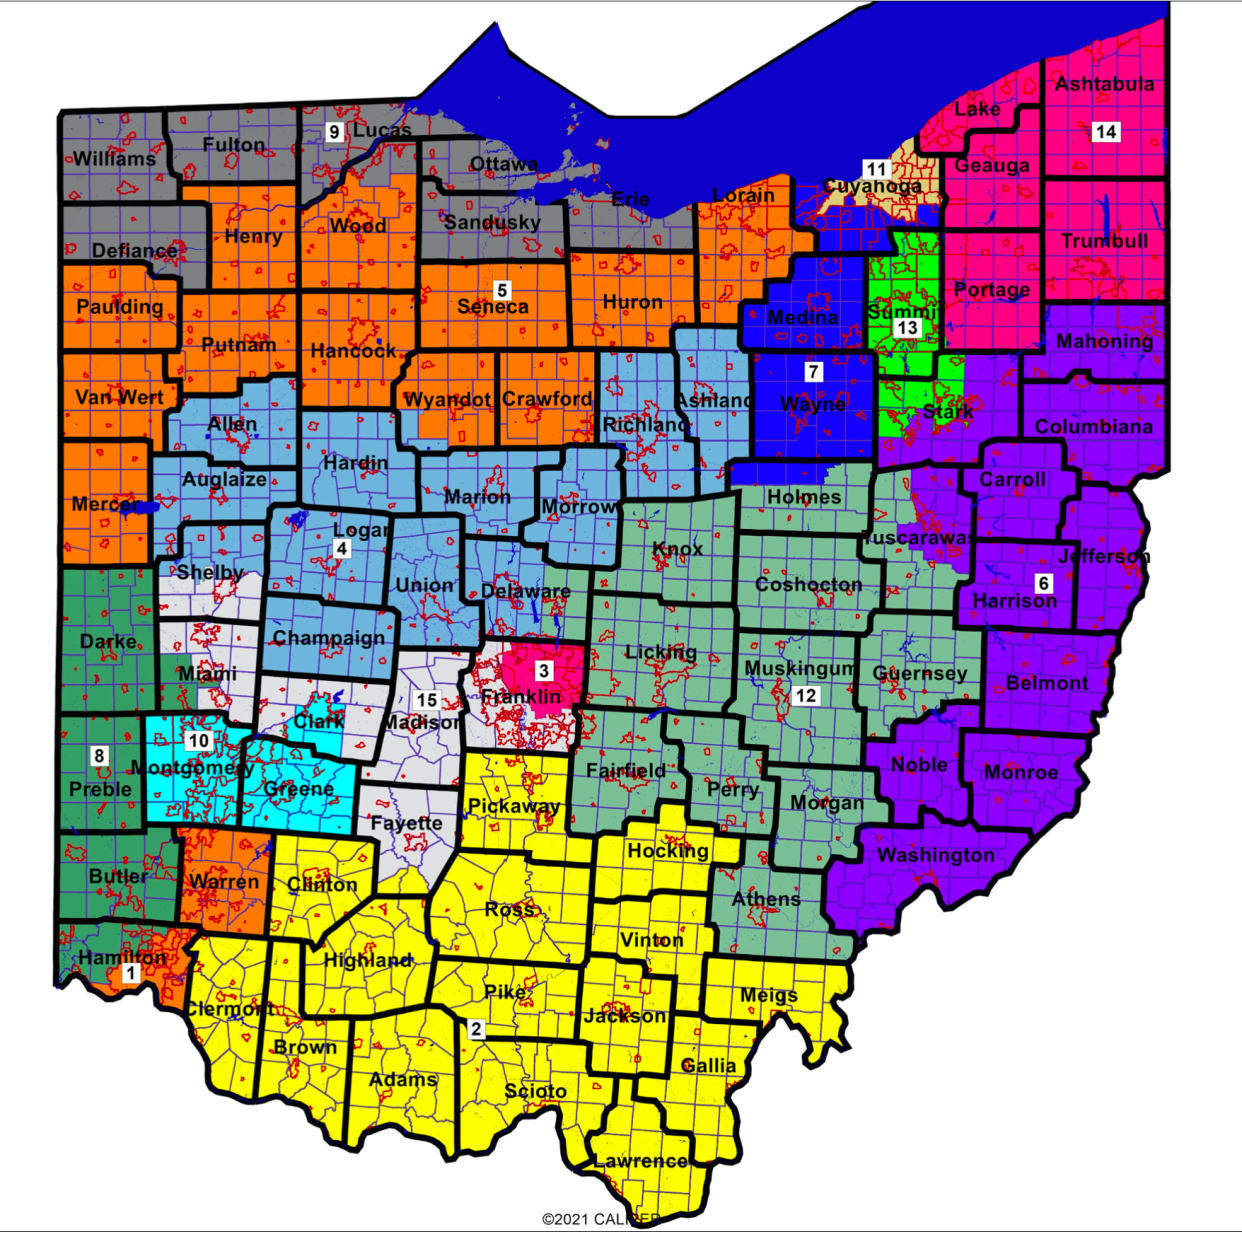 Ohio will use this congressional map for another election.